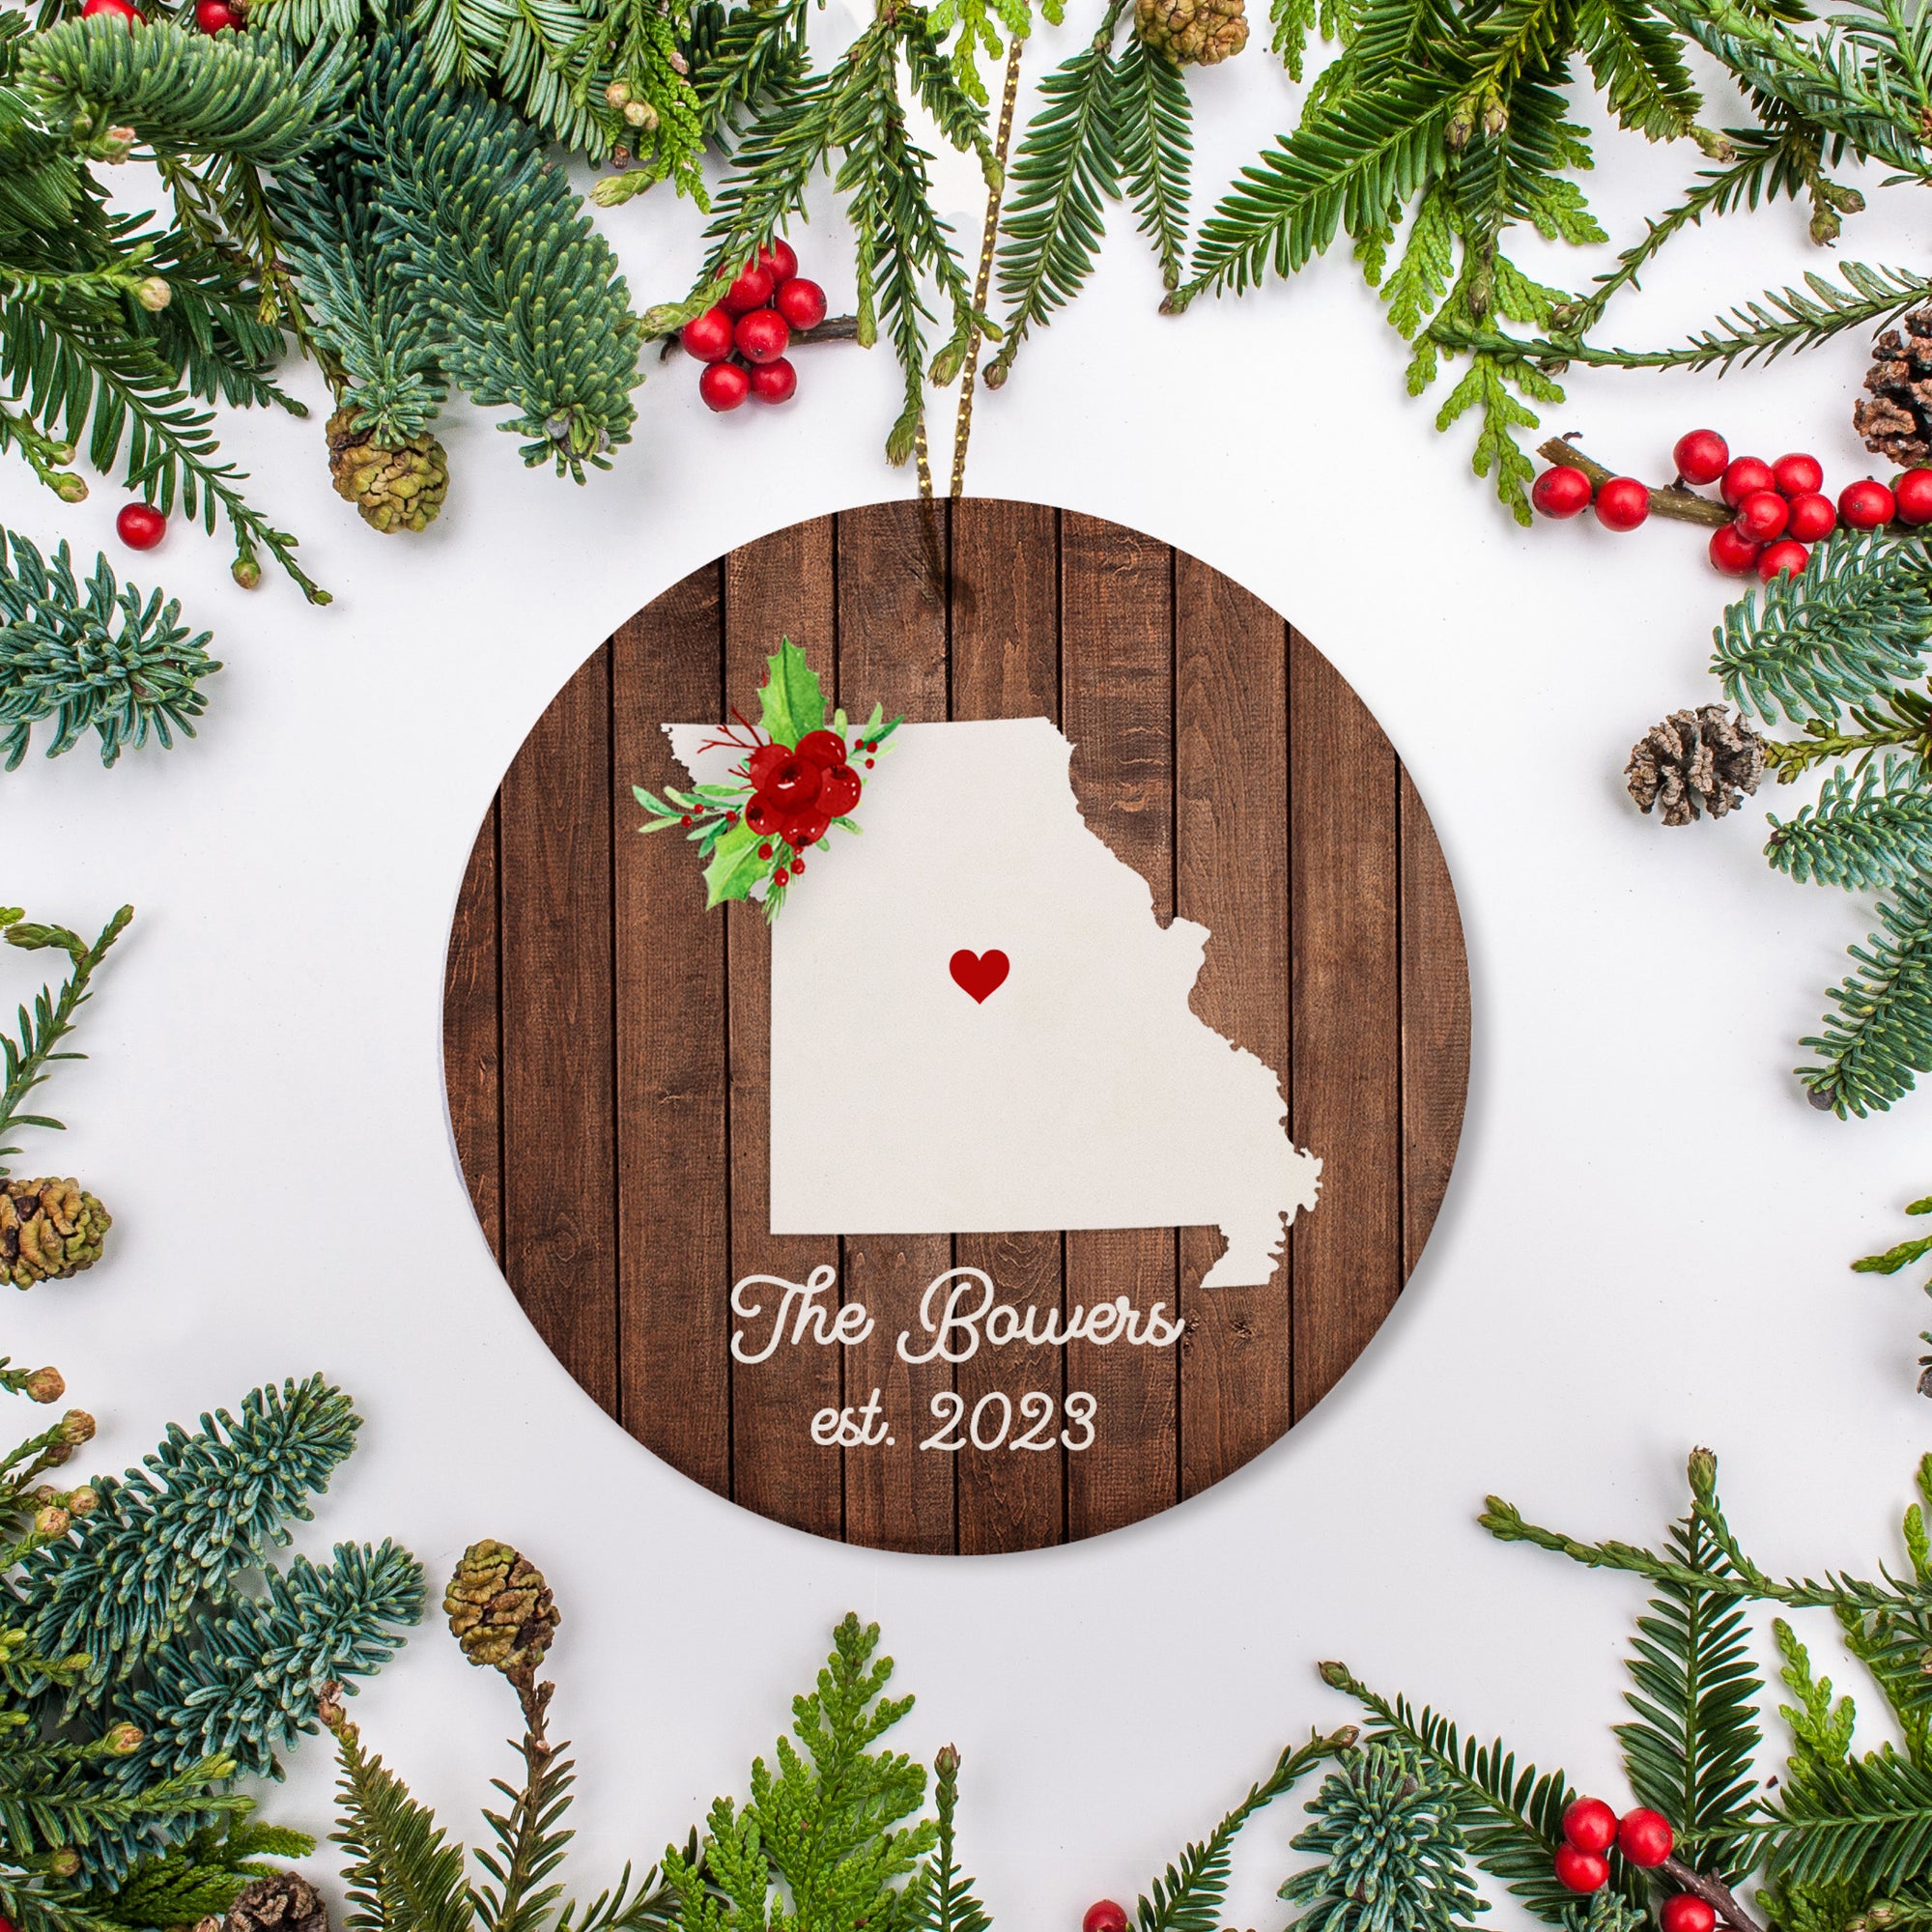 Missouri state christmas ornament. Personalized with your name, city, and year. Ceramic keepsake ornament with a gold hanging string. Great for a college student, new home owners, just moved, or vacation memory